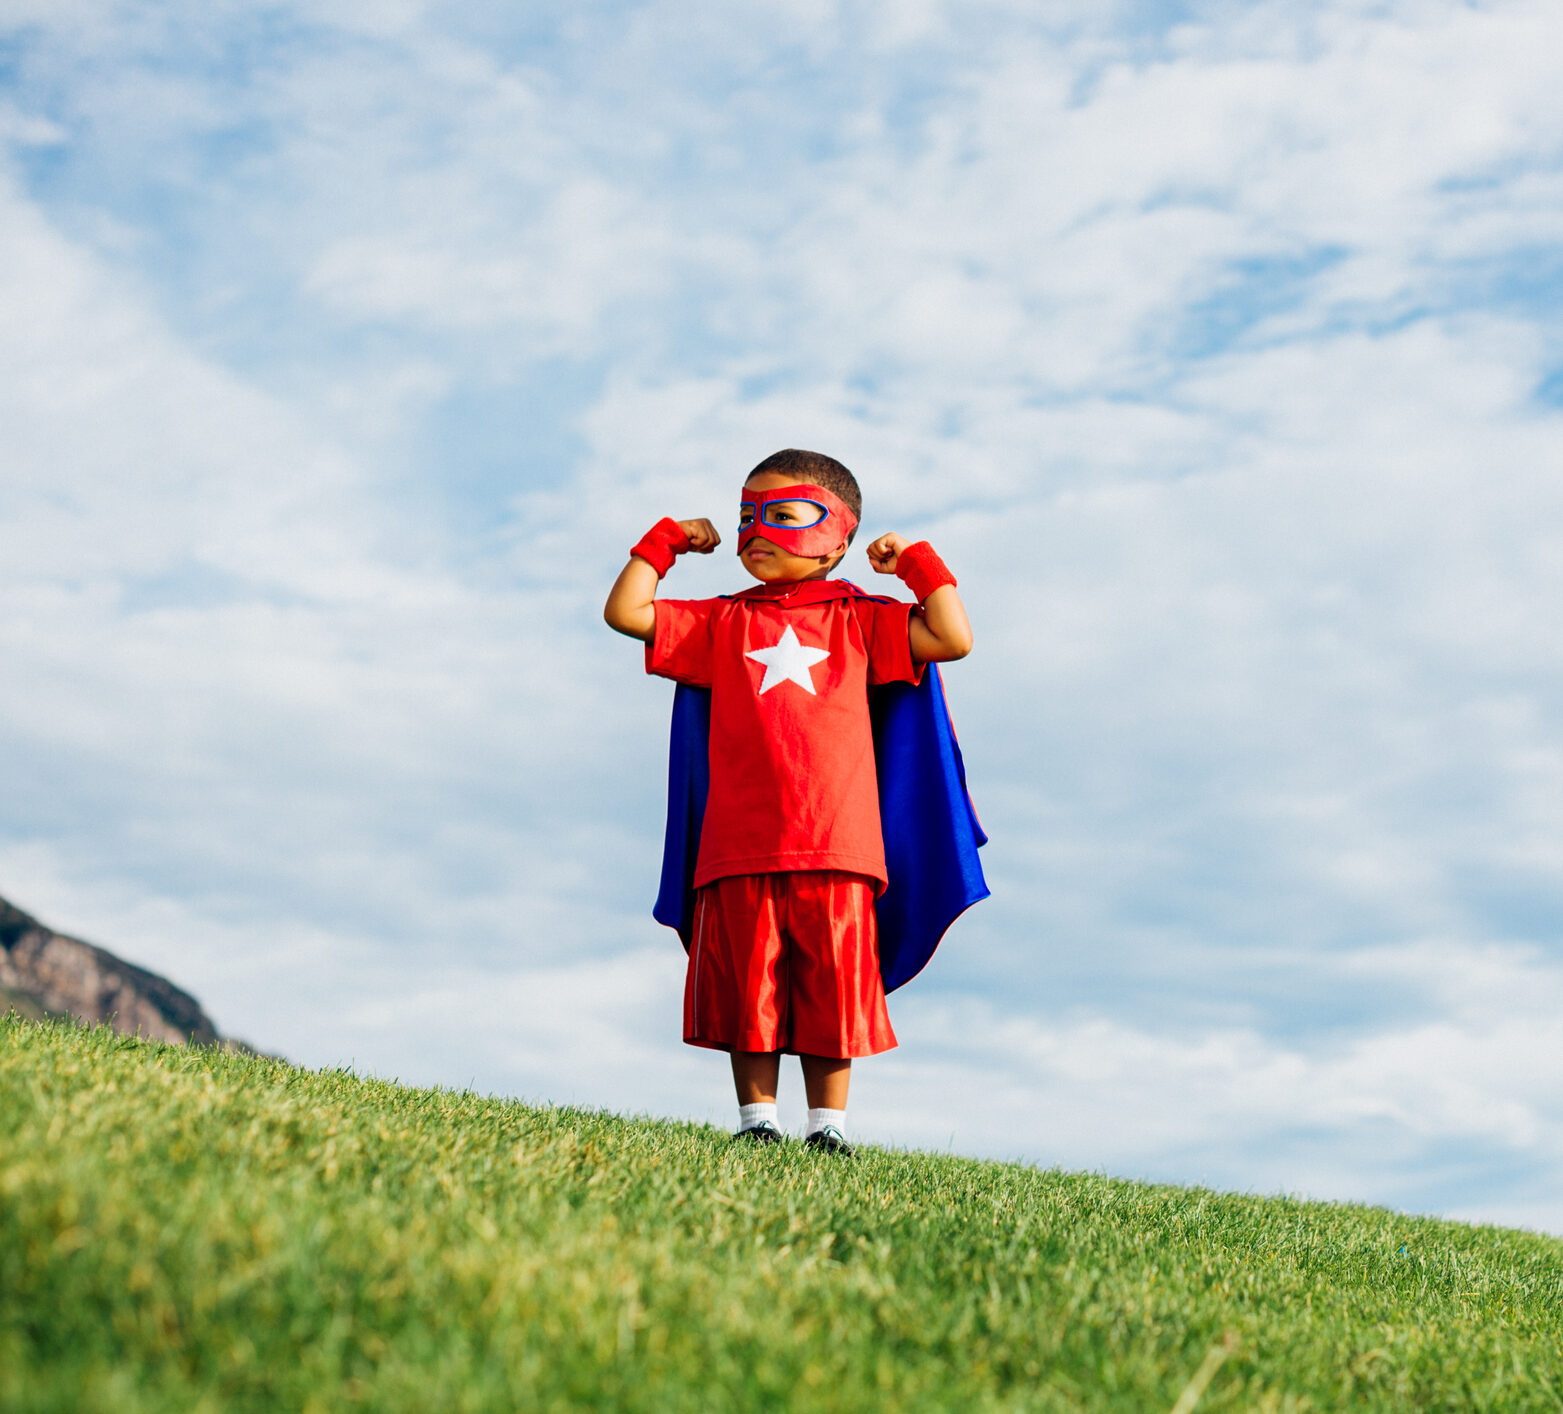 A young boy dressed as a superhero with mask and cape with his fists raised in the hair—he's ready for a time in range action plan!